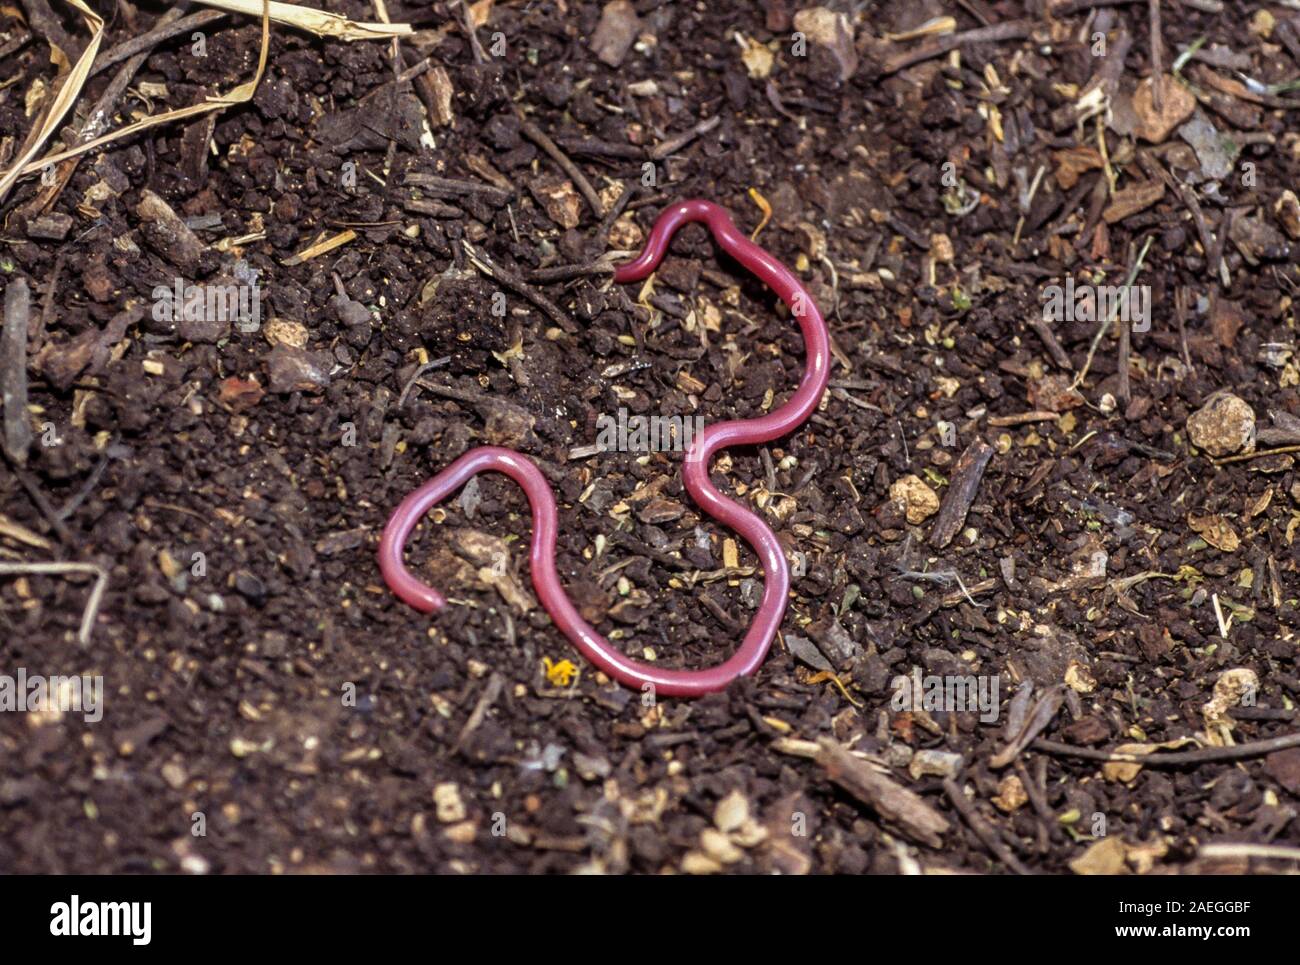 Letheobia simonii is a blind snake species endemic to the Middle East. Photographed in Israel Stock Photo